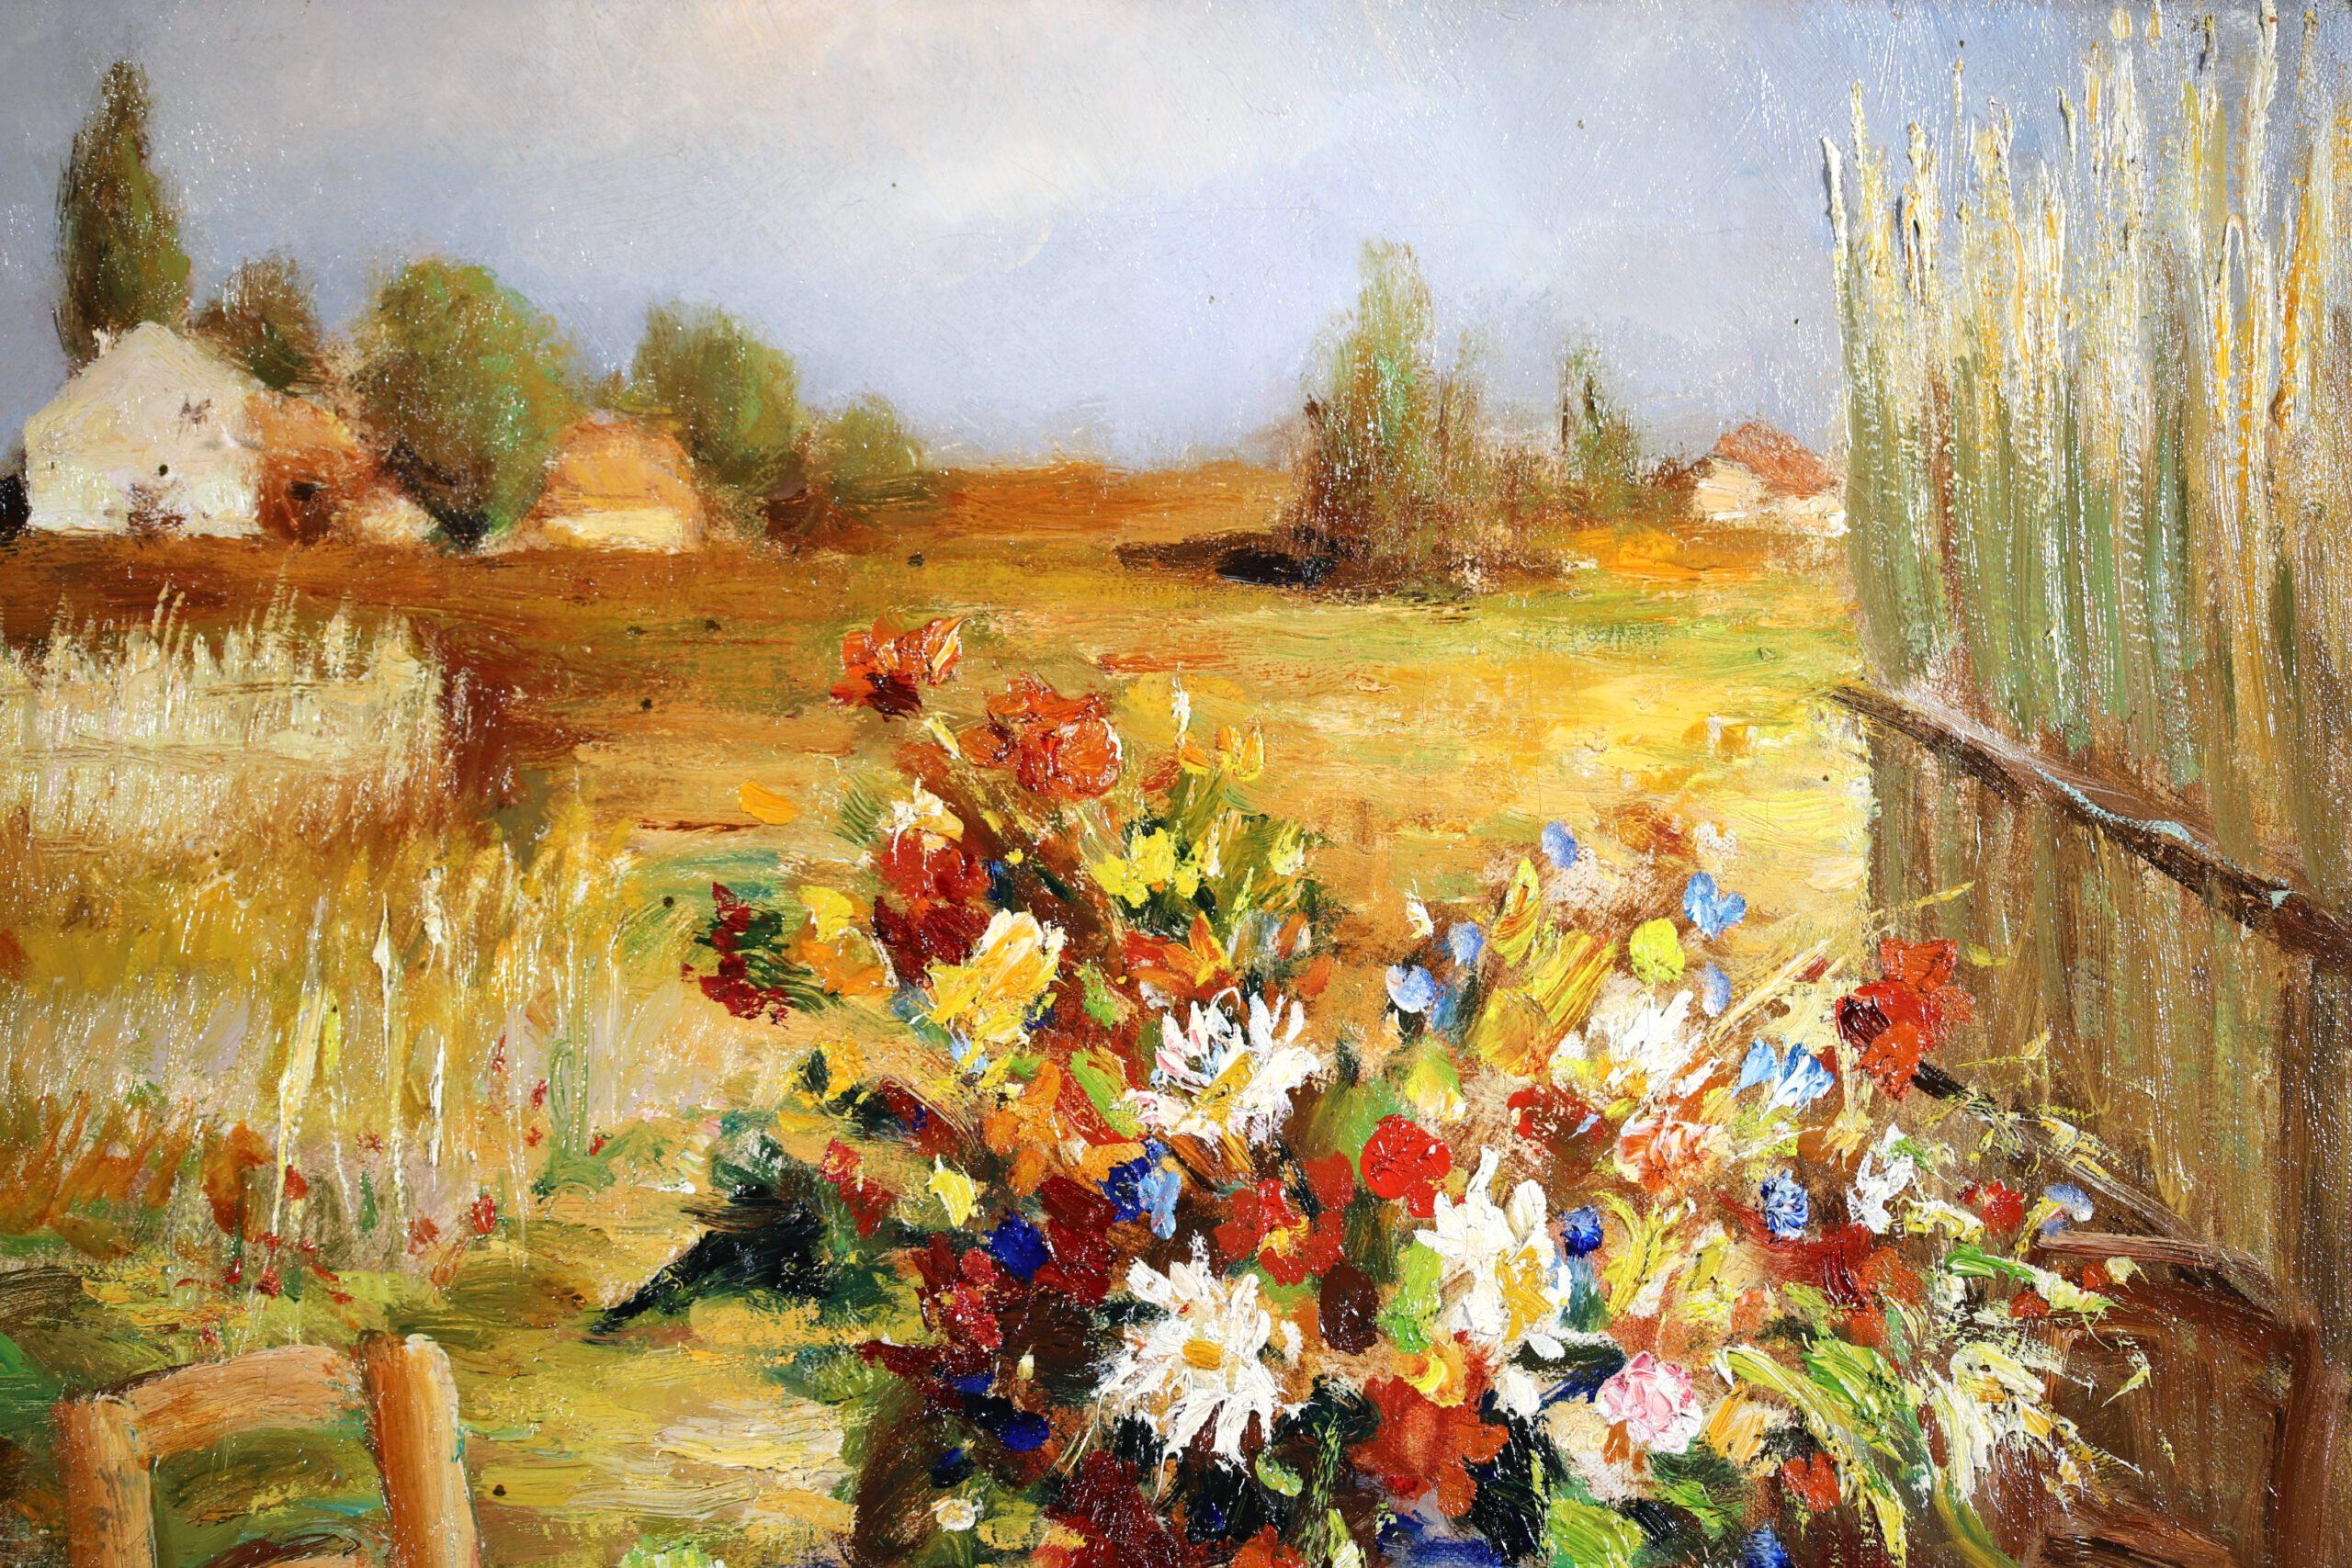 Signed oil on canvas landscape circa 1950 by sought after French post impressionist painter Marcel Dyf. The work depicts a breakfast table with bread laid out and a blue vase filled with wild flowers in the centre. The table is set in a rural